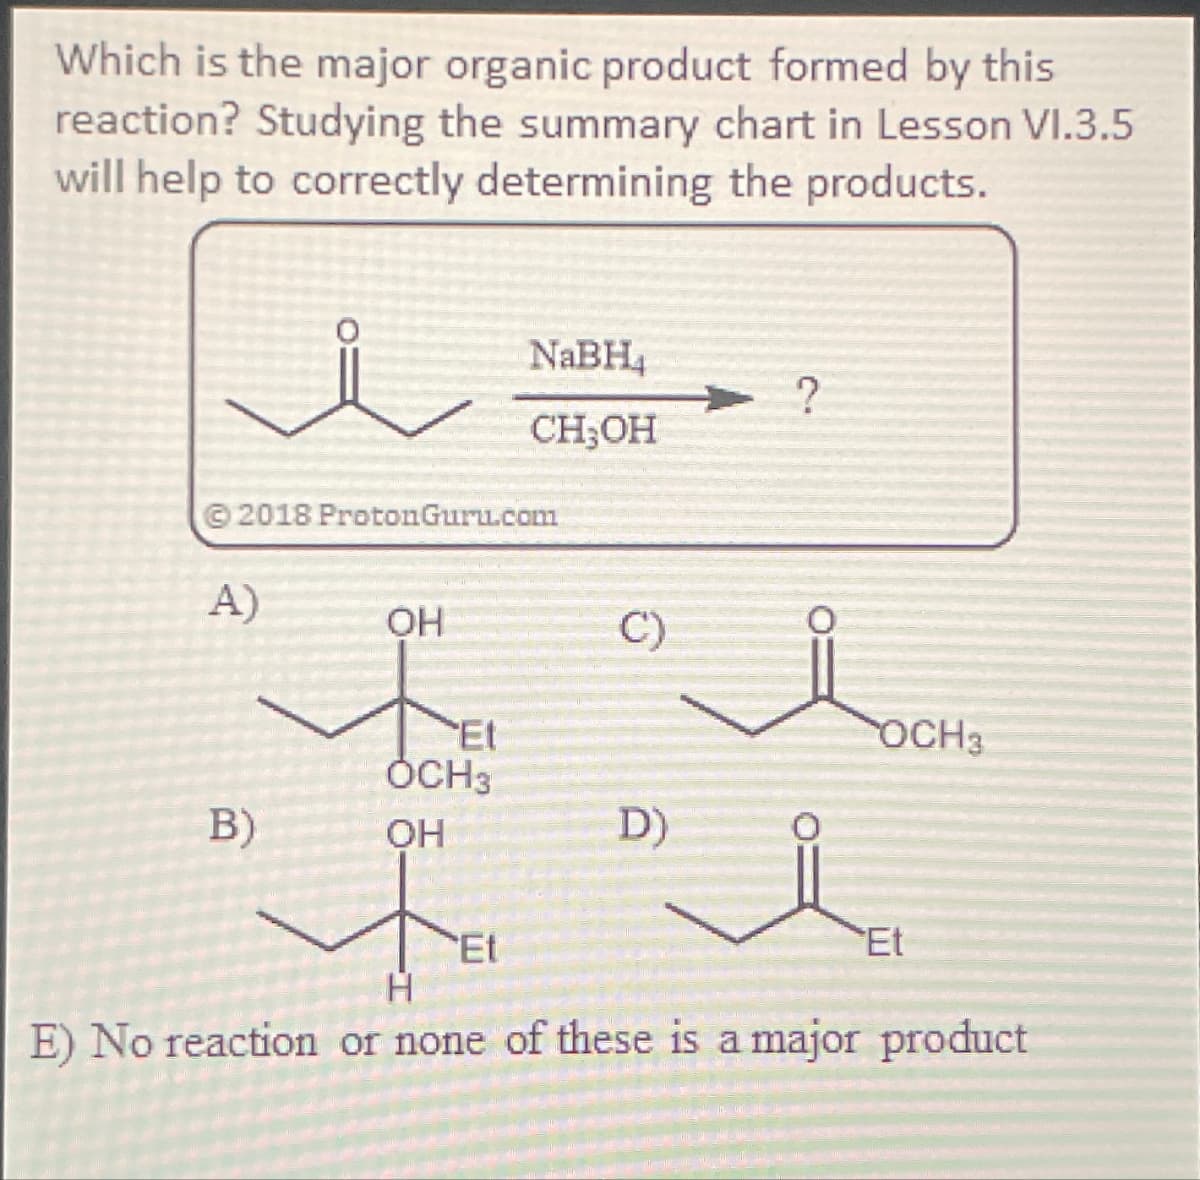 Which is the major organic product formed by this
reaction? Studying the summary chart in Lesson VI.3.5
will help to correctly determining the products.
NaBH4
?
CH3OH
© 2018 ProtonGuru.com
A)
OH
C)
Et
OCH3
OCH3
B)
OH
D)
Et
Et
H
E) No reaction or none of these is a major product